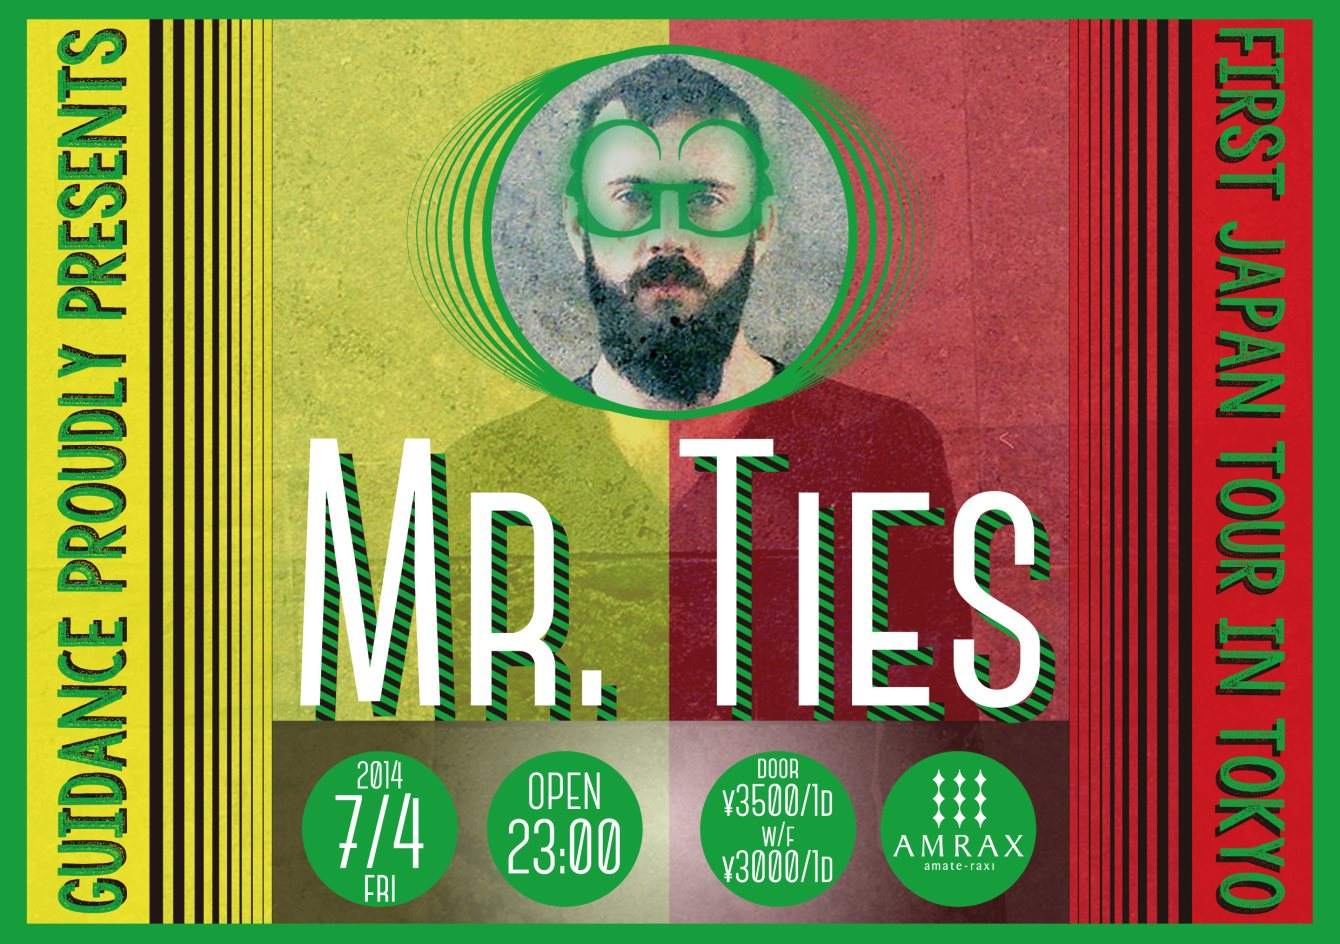 Guidance Proudly presents Mr Ties 1st Japan Tour in Tokyo - Página frontal